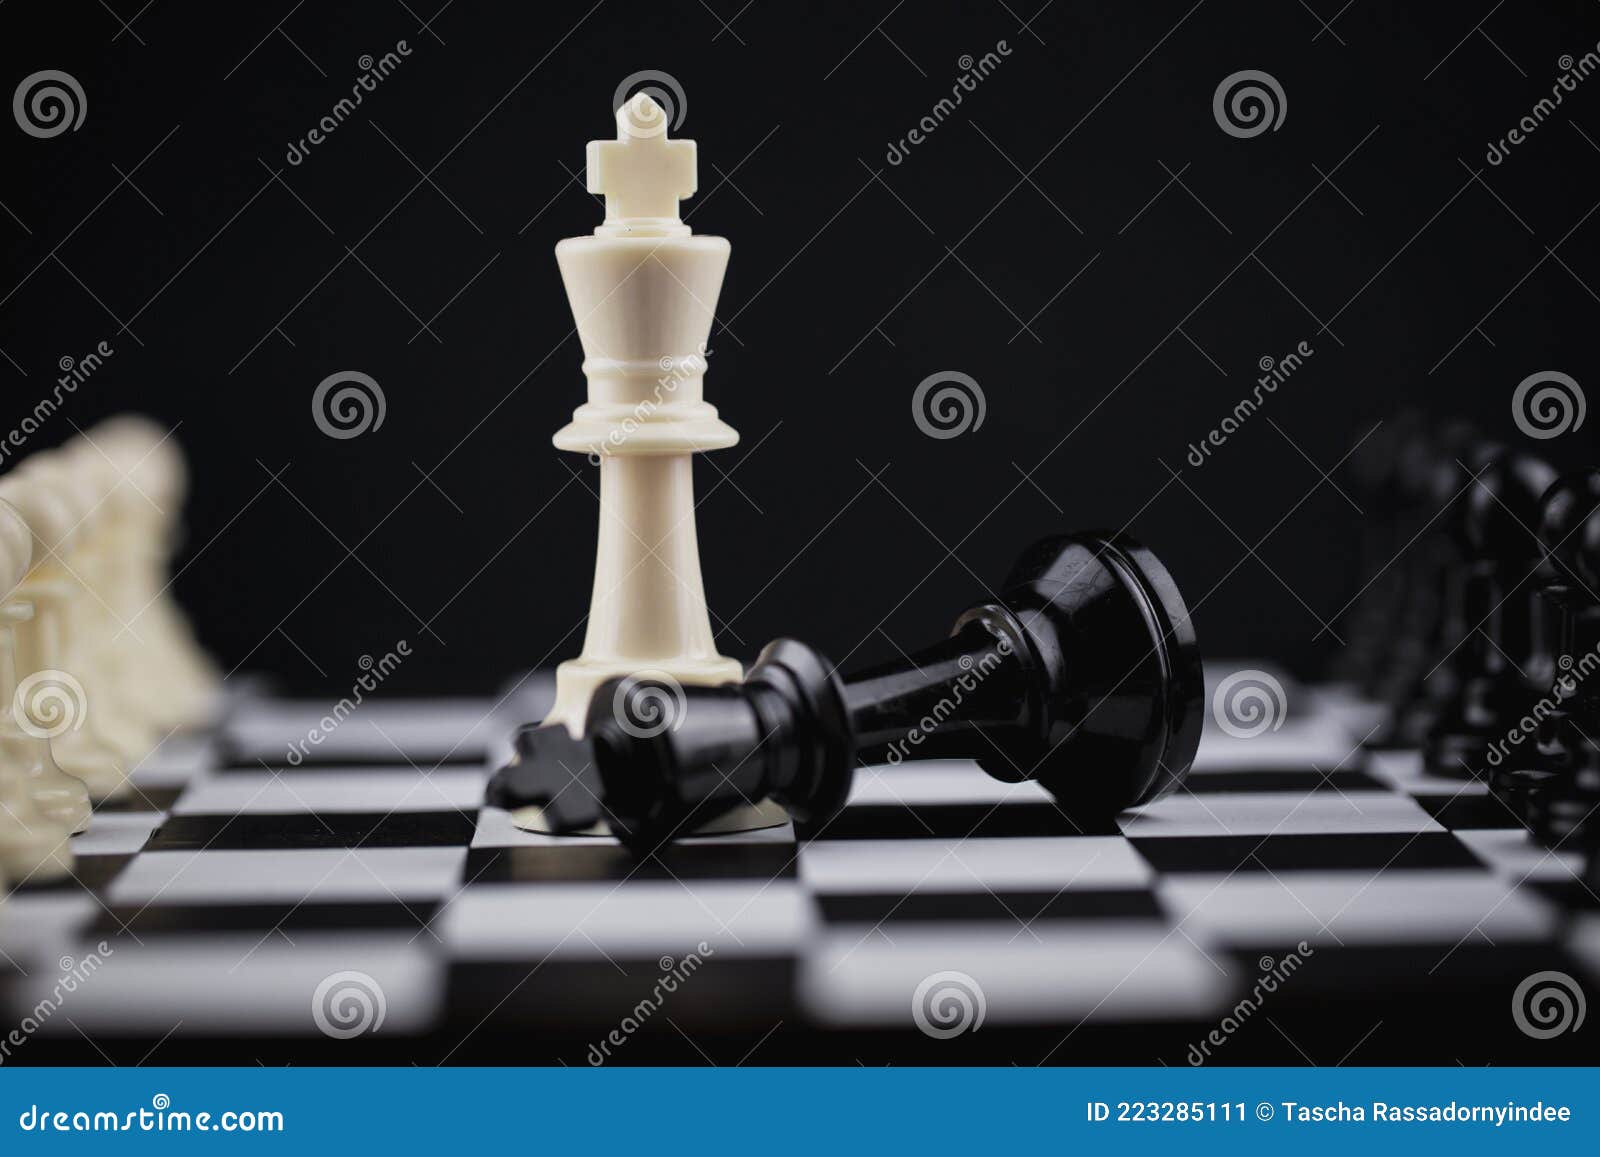 battle chess download free full version